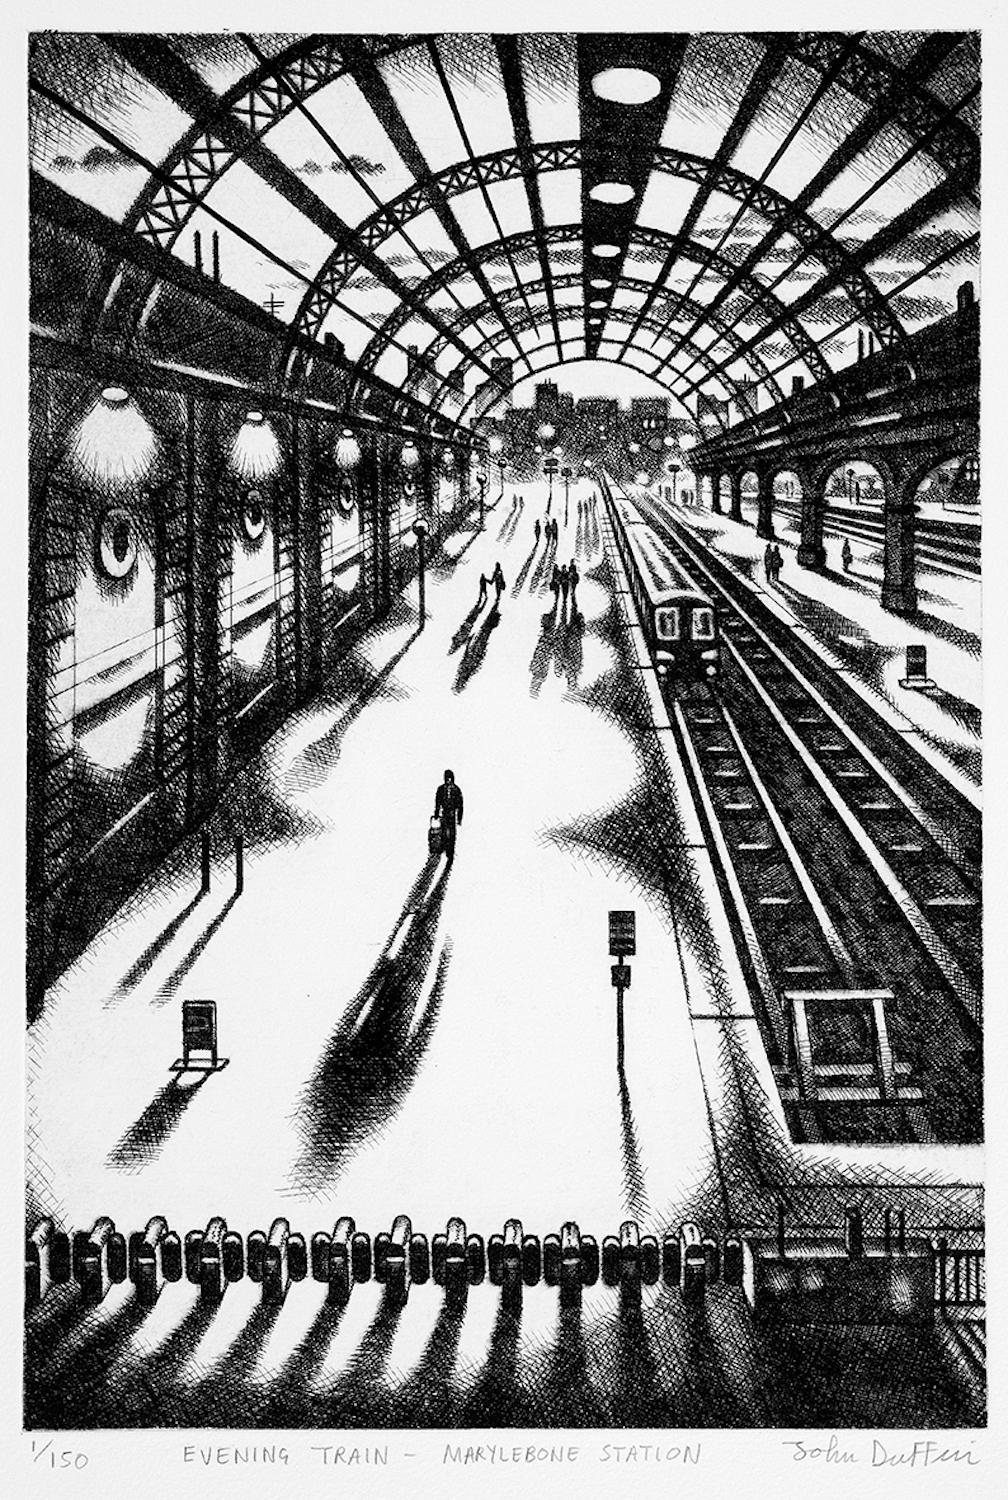 Kings Cross Rain by John Duffin [2018]

limited_edition
Etching on paper
Edition number 15/150
Image size: H:30 cm x W:25 cm
Complete Size of Unframed Work: H:56 cm x W:38 cm x D:1cm
Sold Unframed
Please note that insitu images are purely an